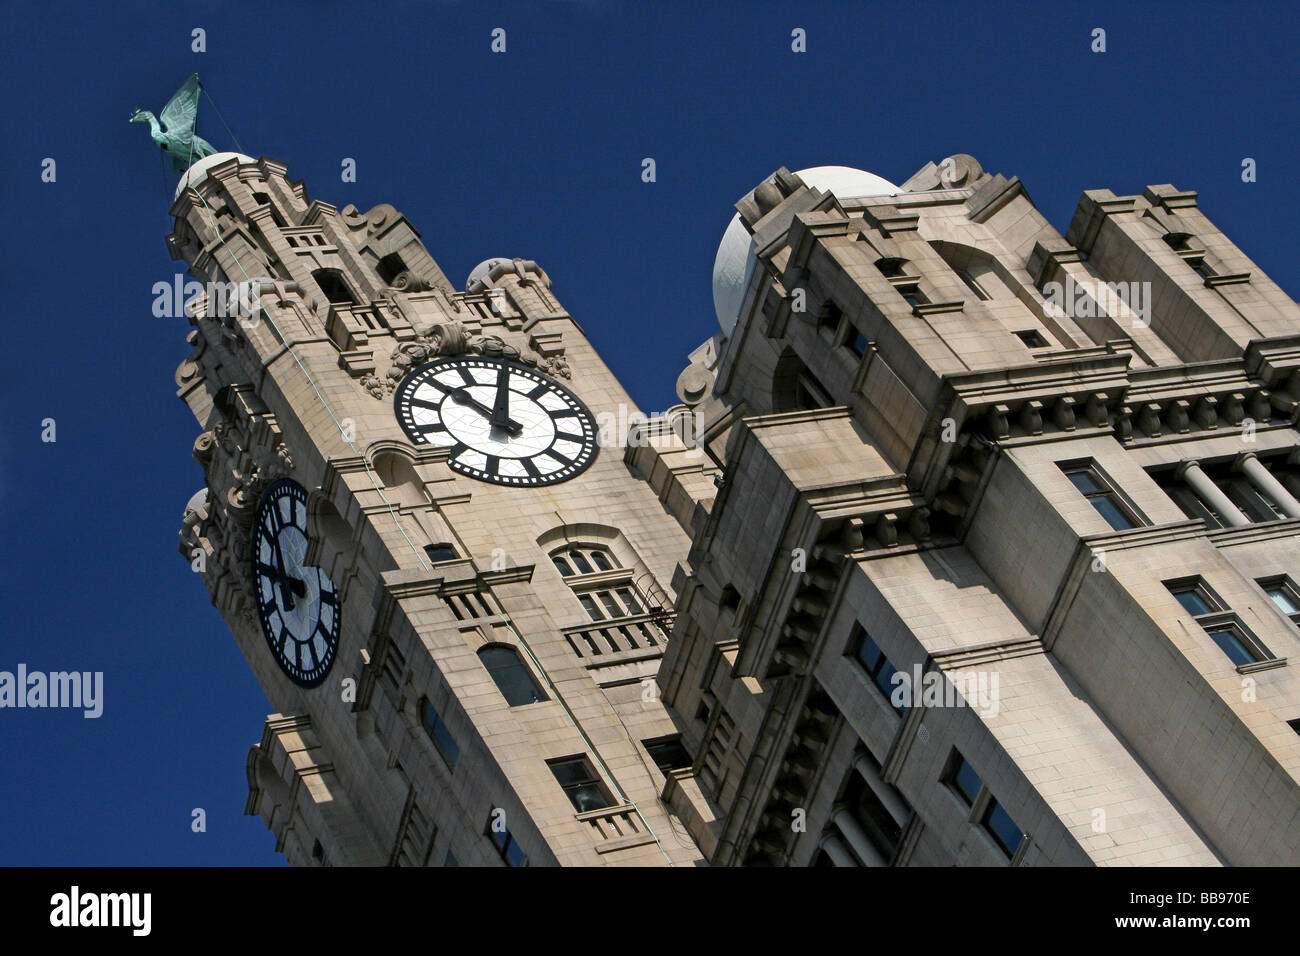 Horizontal View Of Clock Tower And Liver Birds, The Royal Liver Building, Liverpool, Merseyside, UK Stock Photo